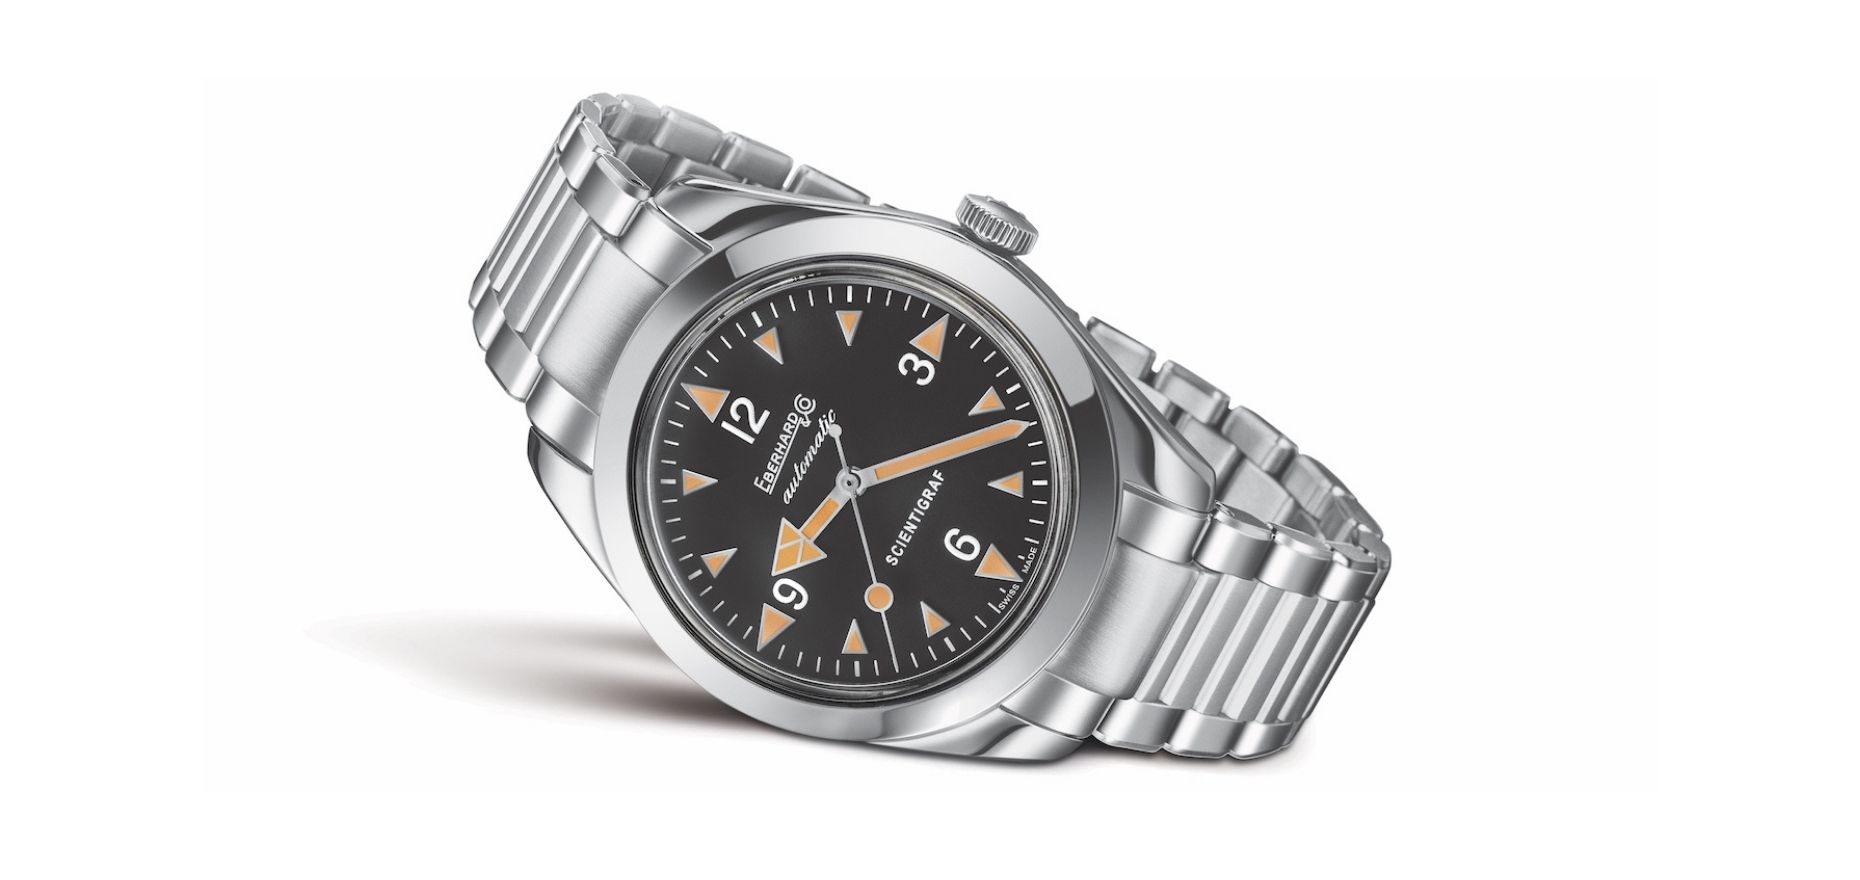 60 years of Scientigraf: Eberhard & Co. revives one of the world’s first anti-magnetic watches